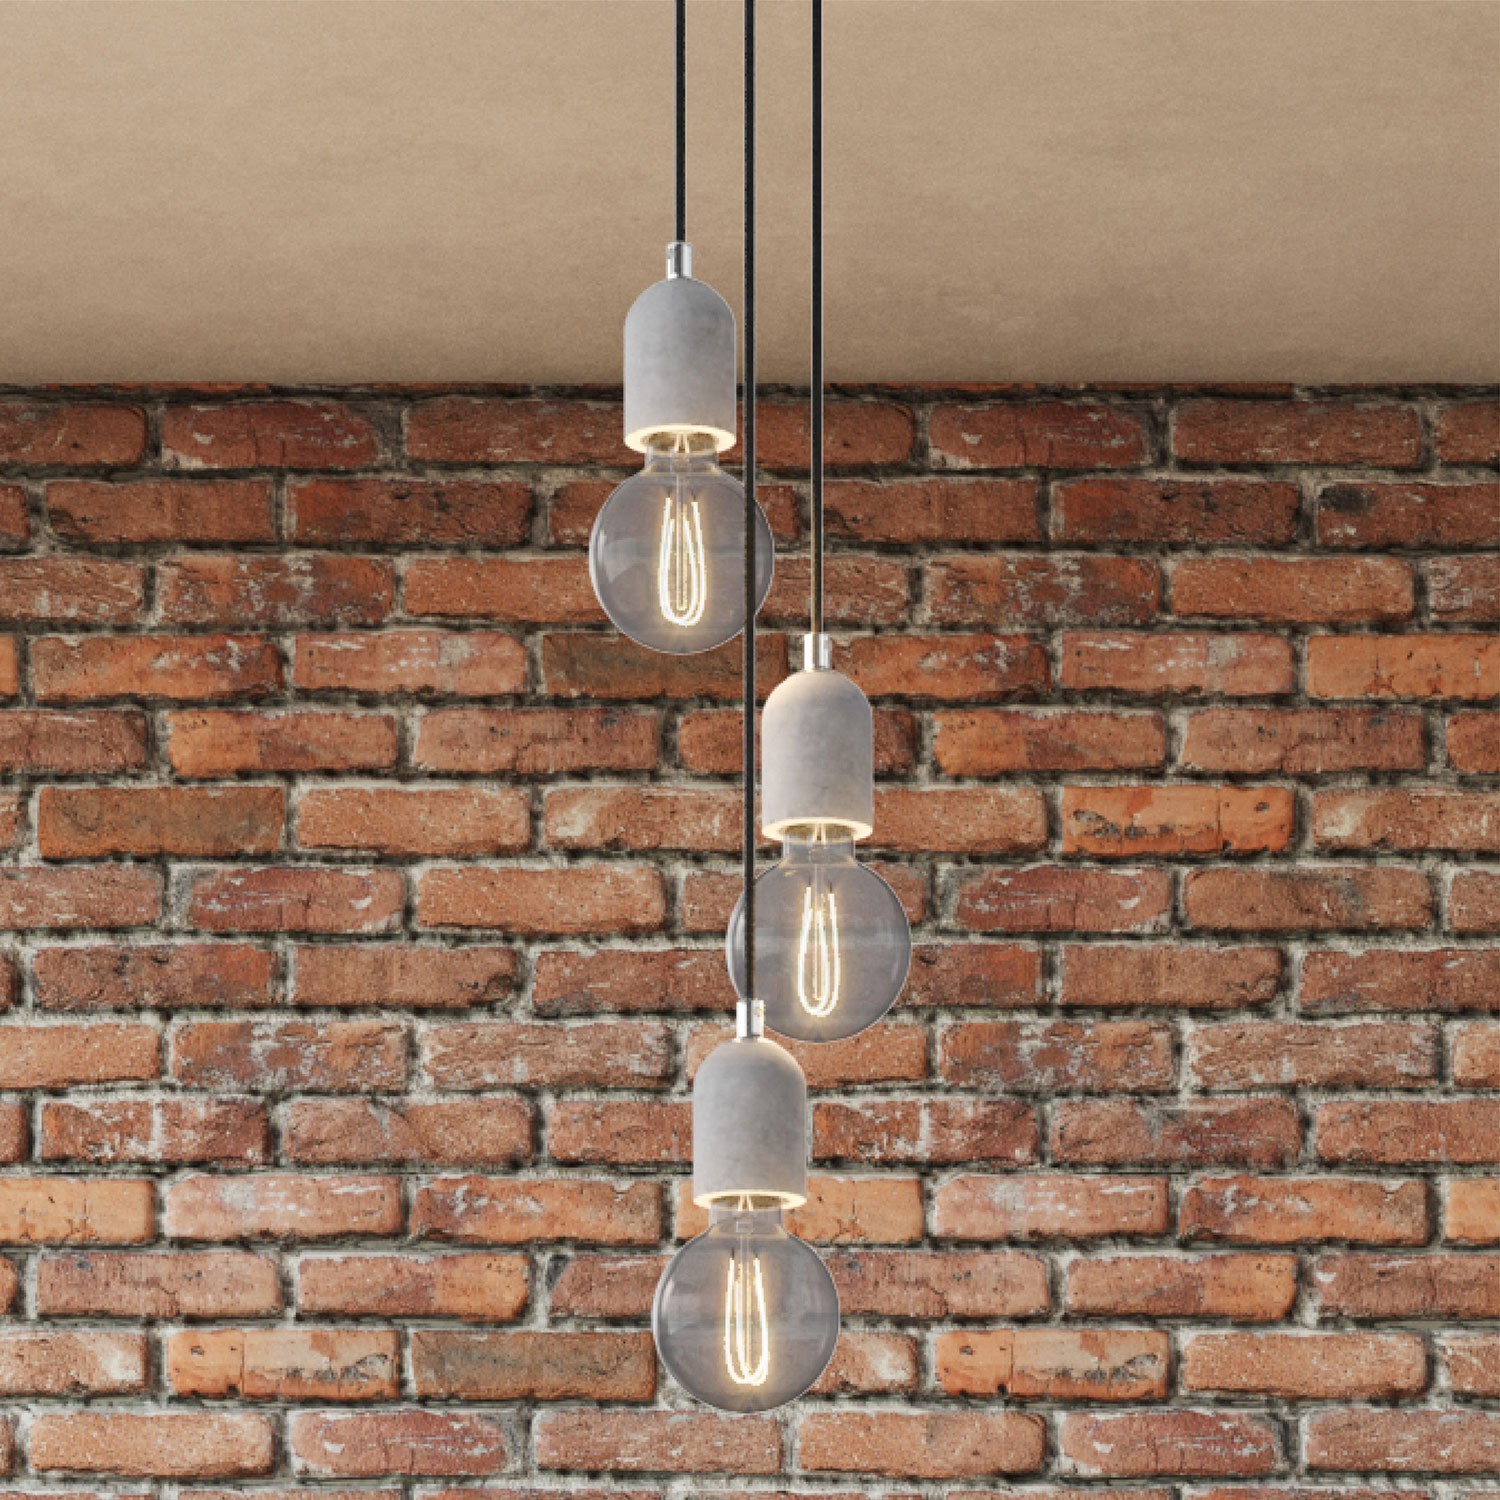 3-light pendant lamp with 200 mm round Rose-One, featuring fabric cable and concrete finishes